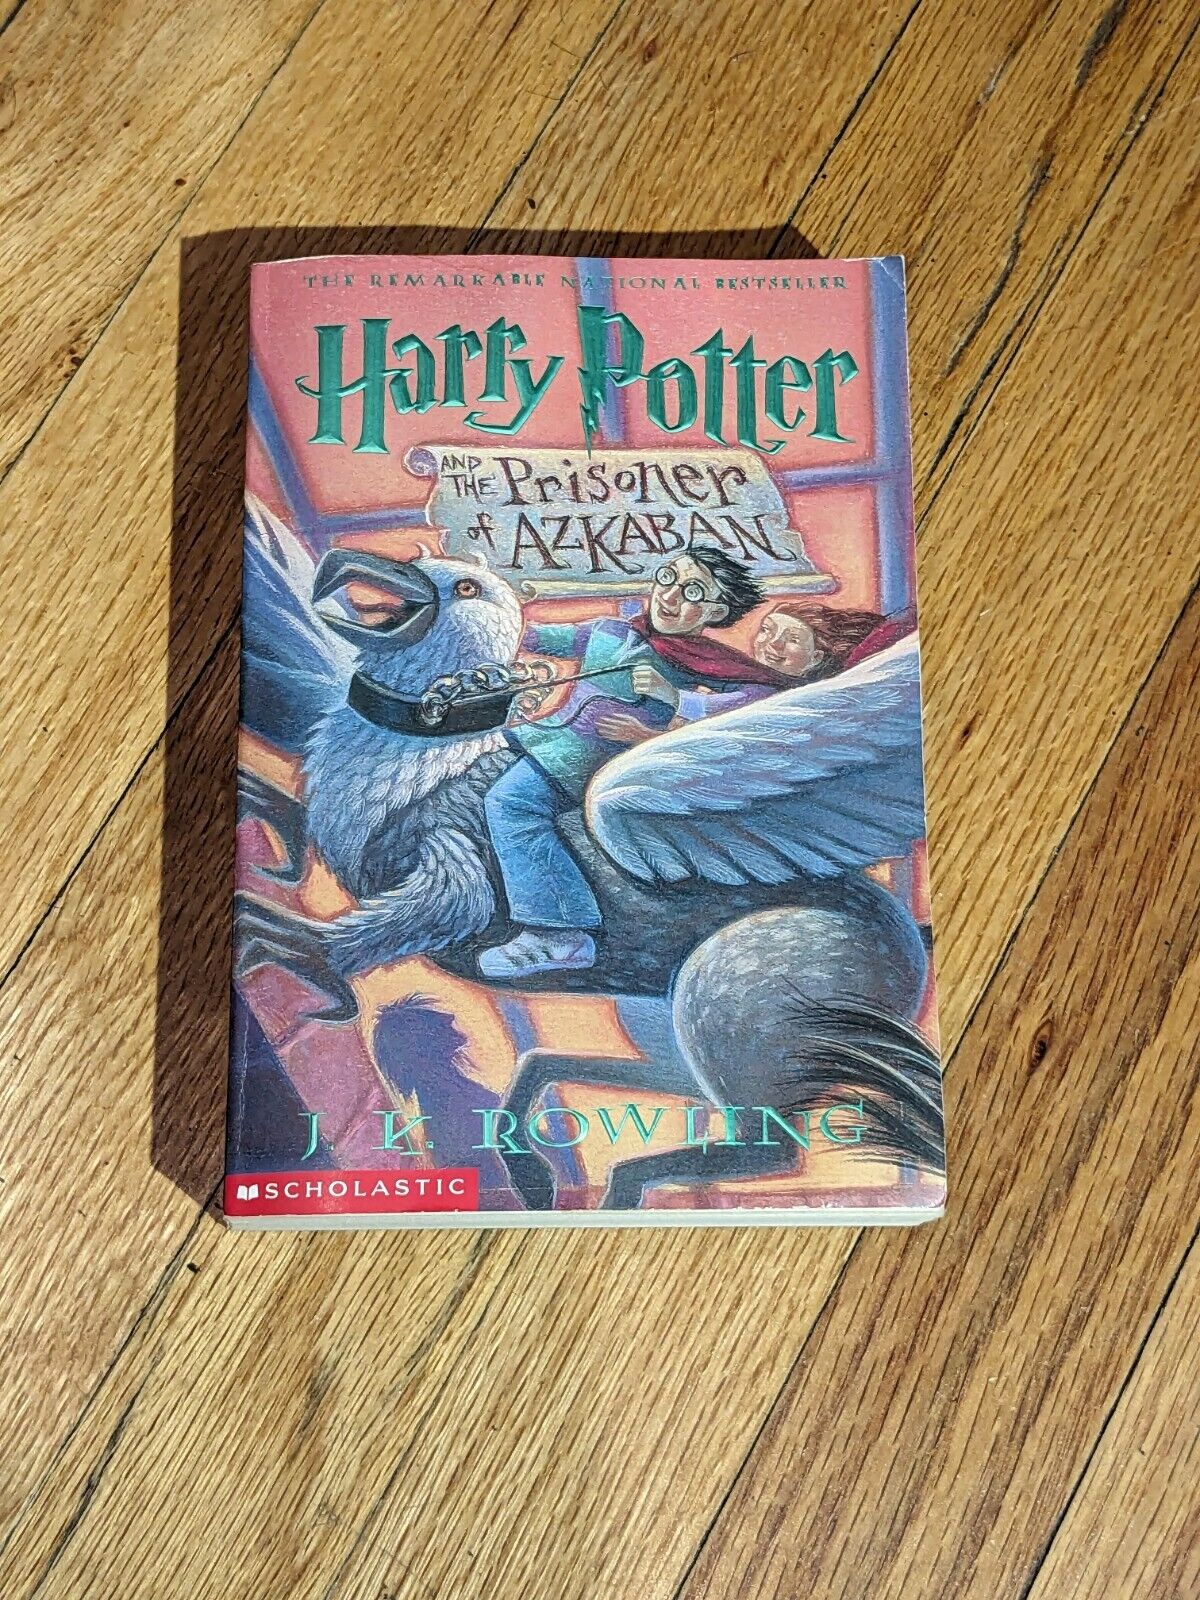 Harry Potter and the Prisoner of Azkaban (First American Edition Paperback) by J. K. Rowling - Asylum Books